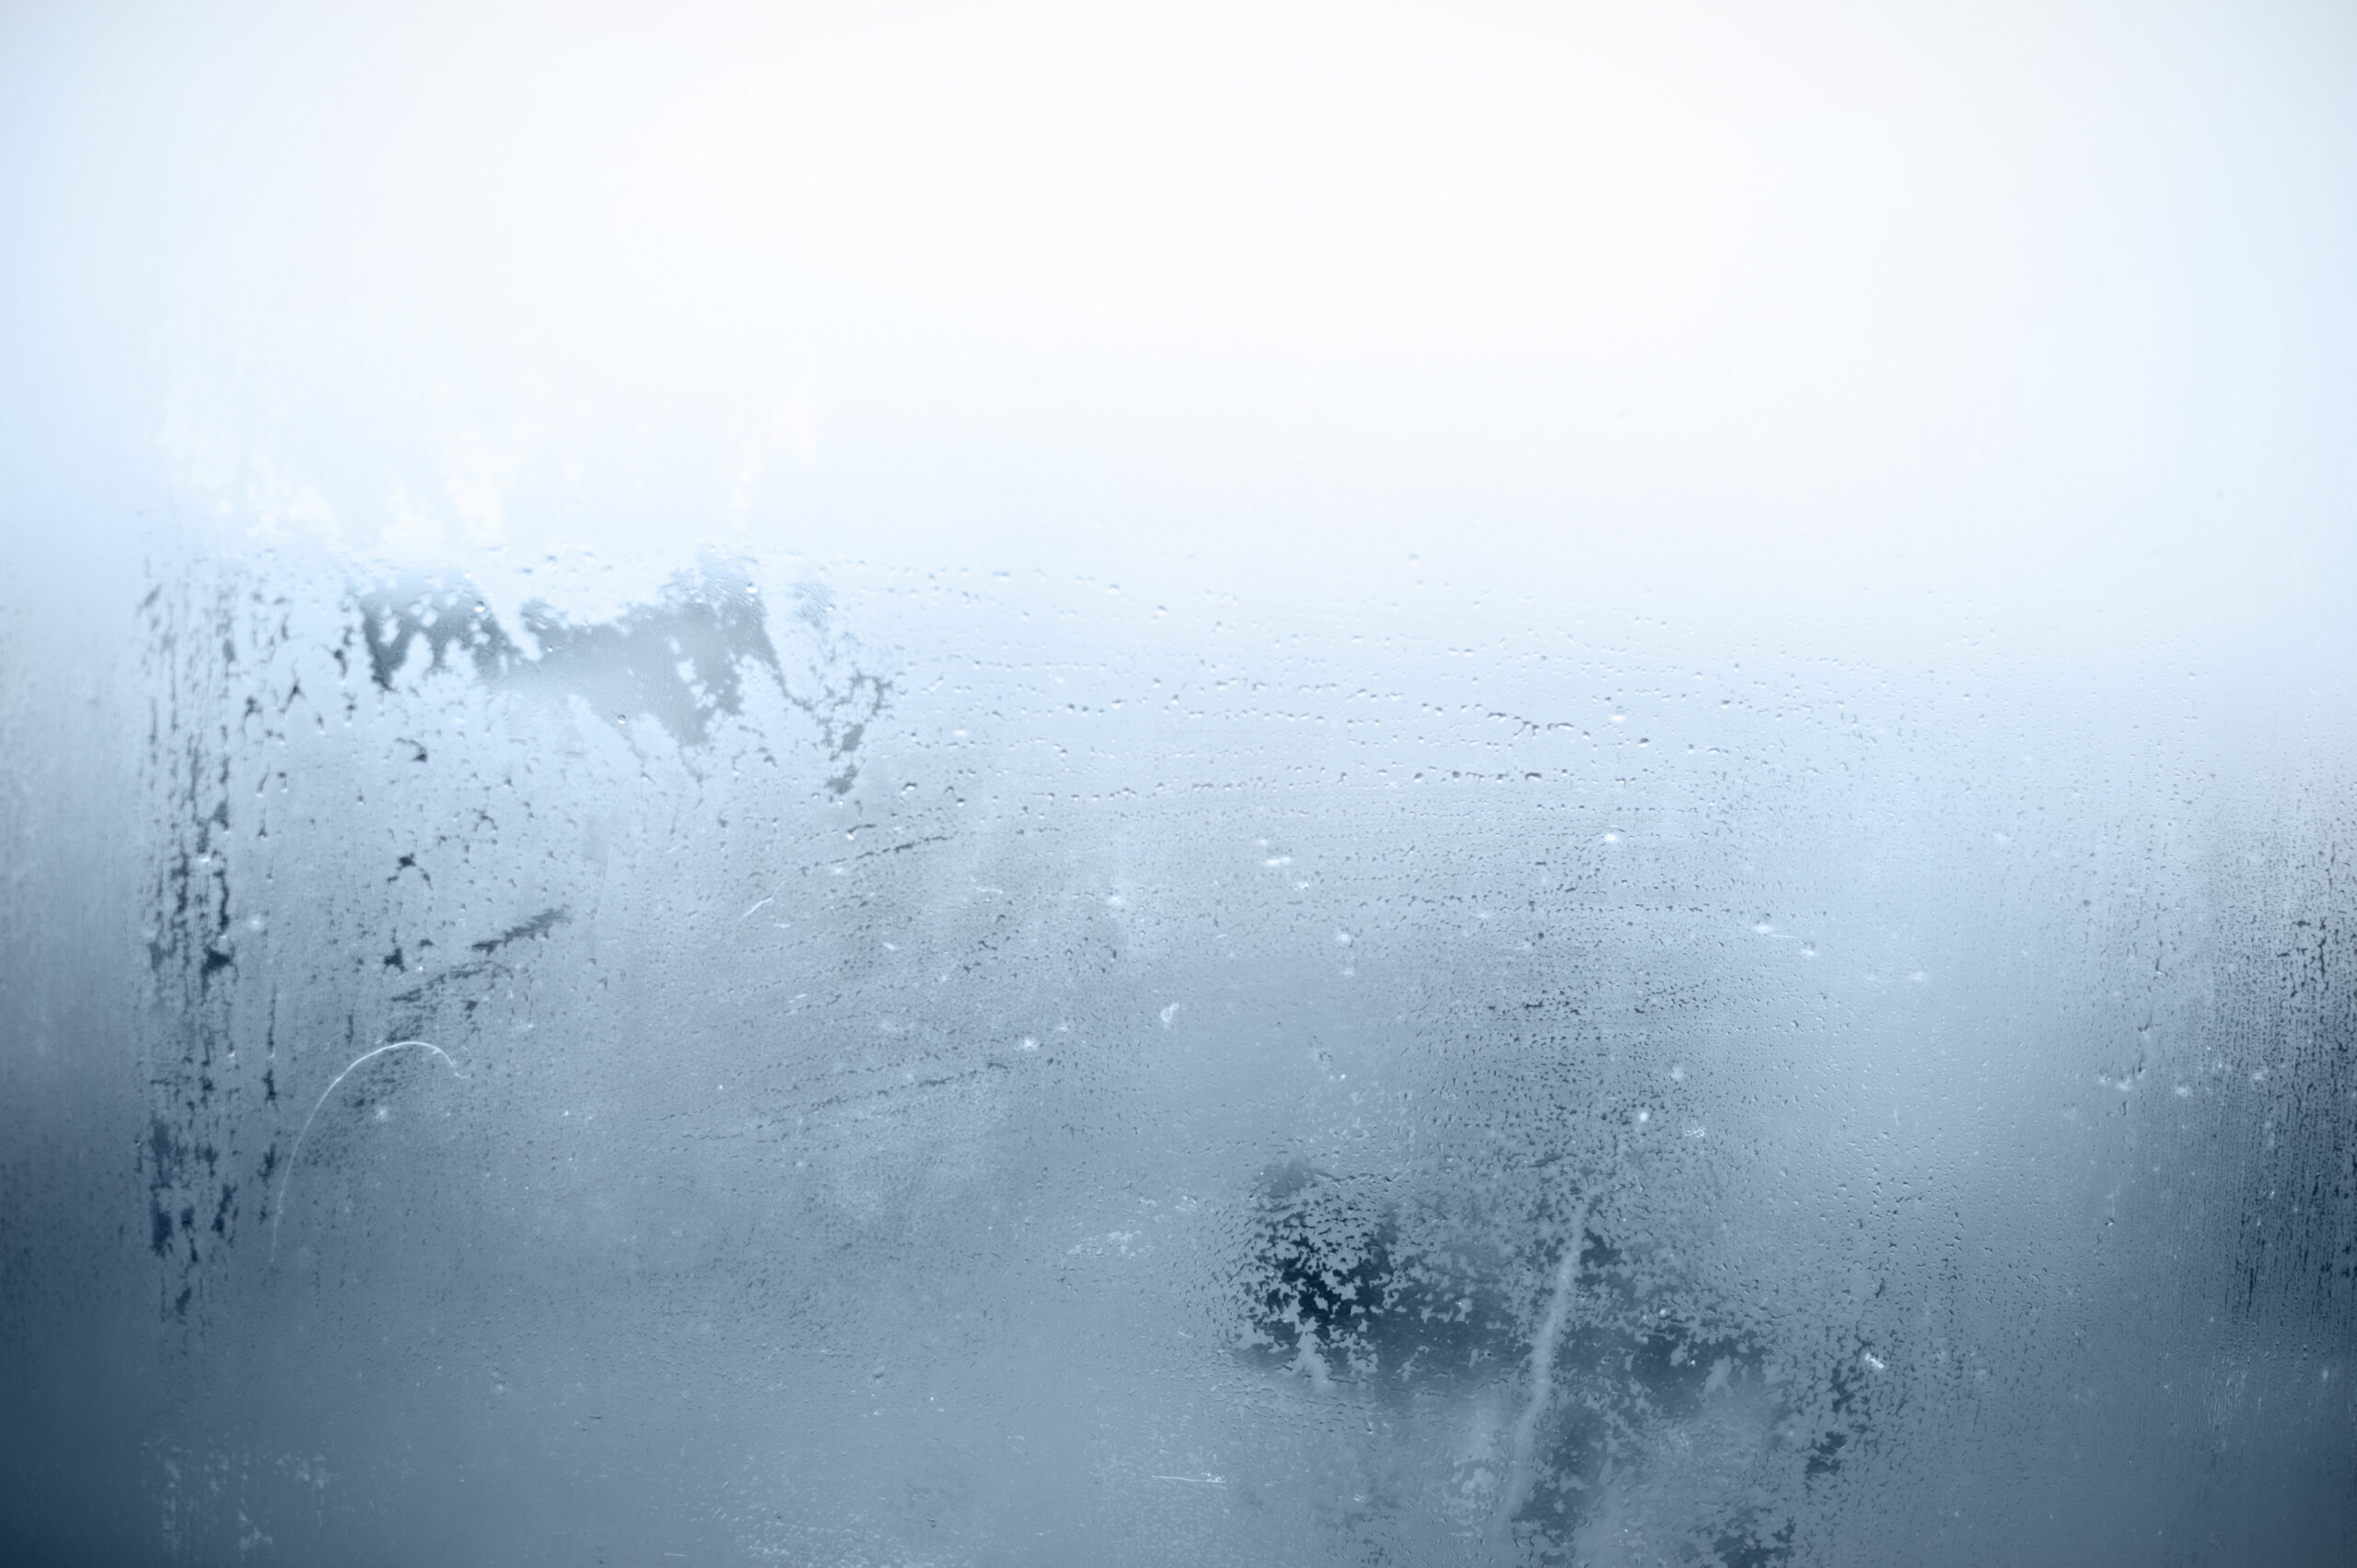 Foggy window with flowing water droplets.